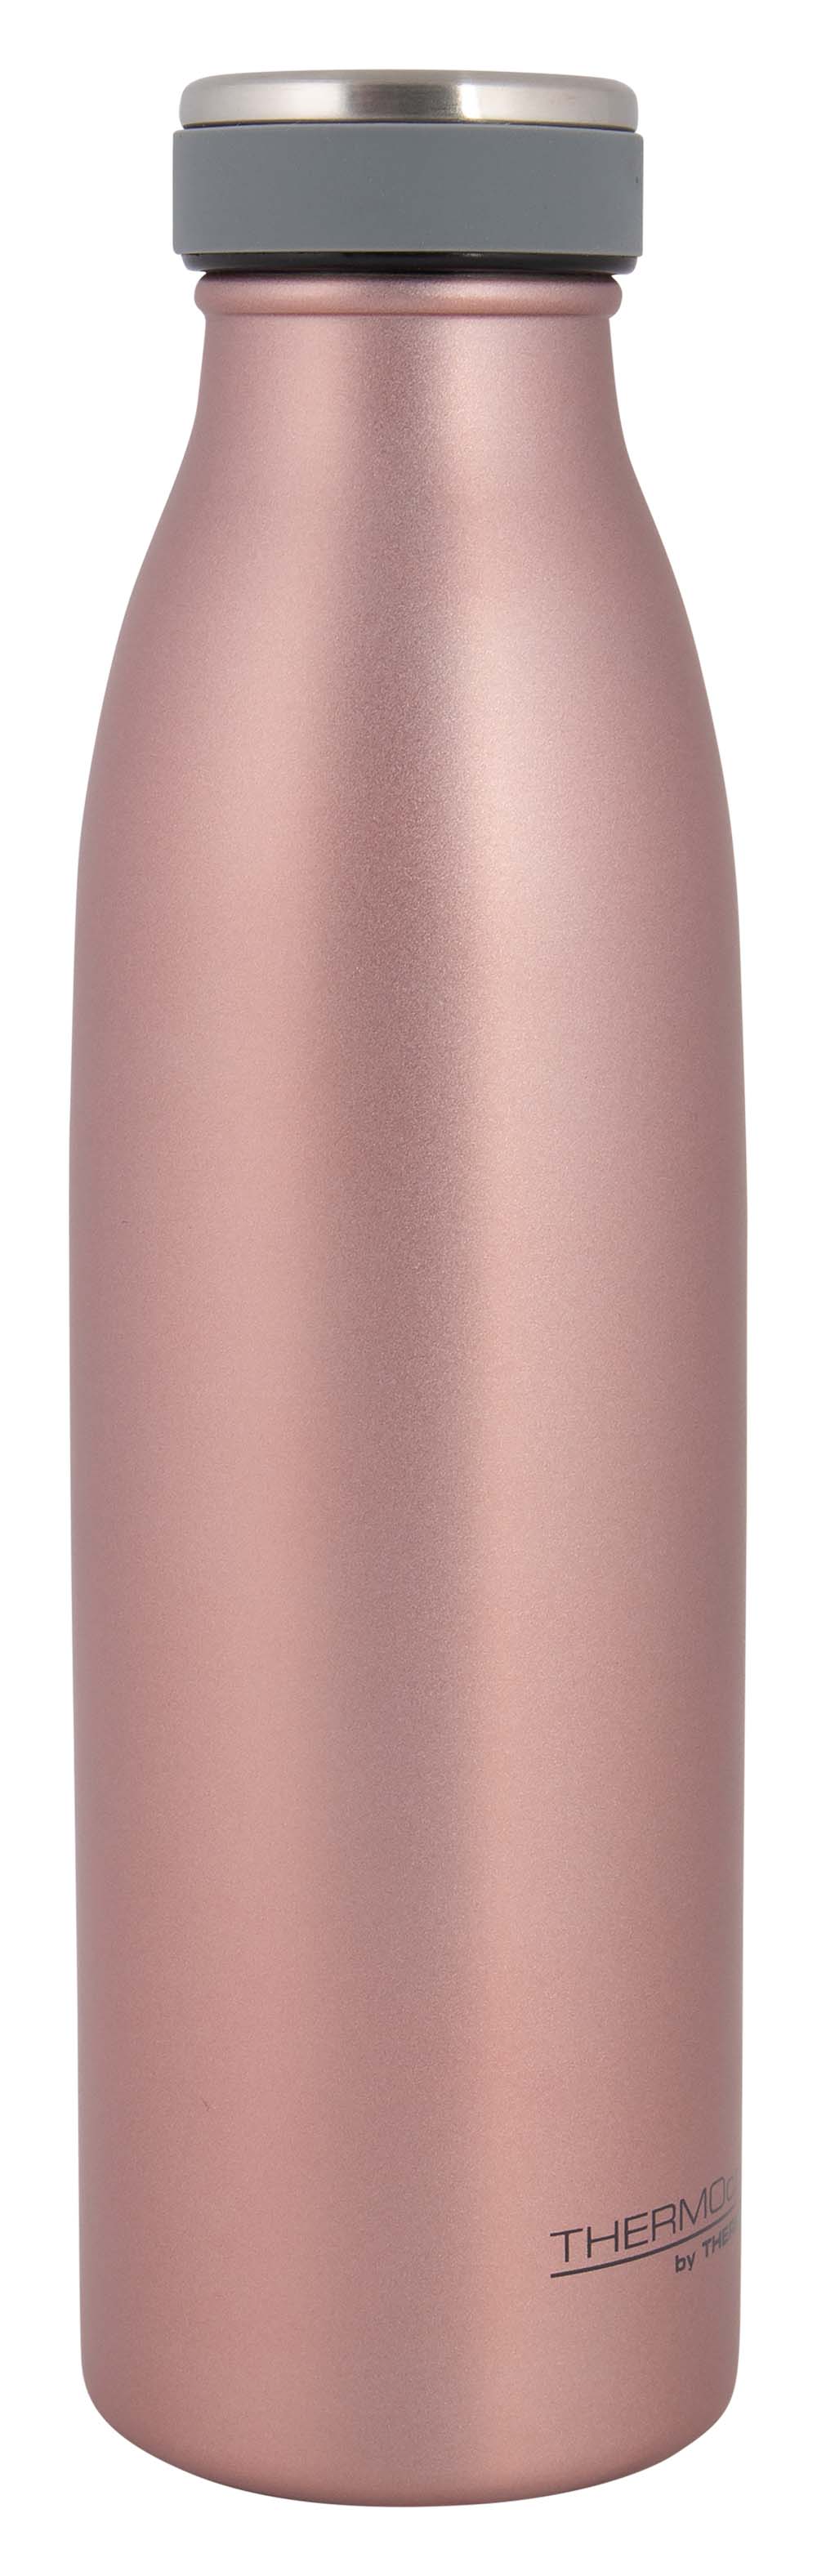 Thermos - Drinkfles - Cafe - Rose